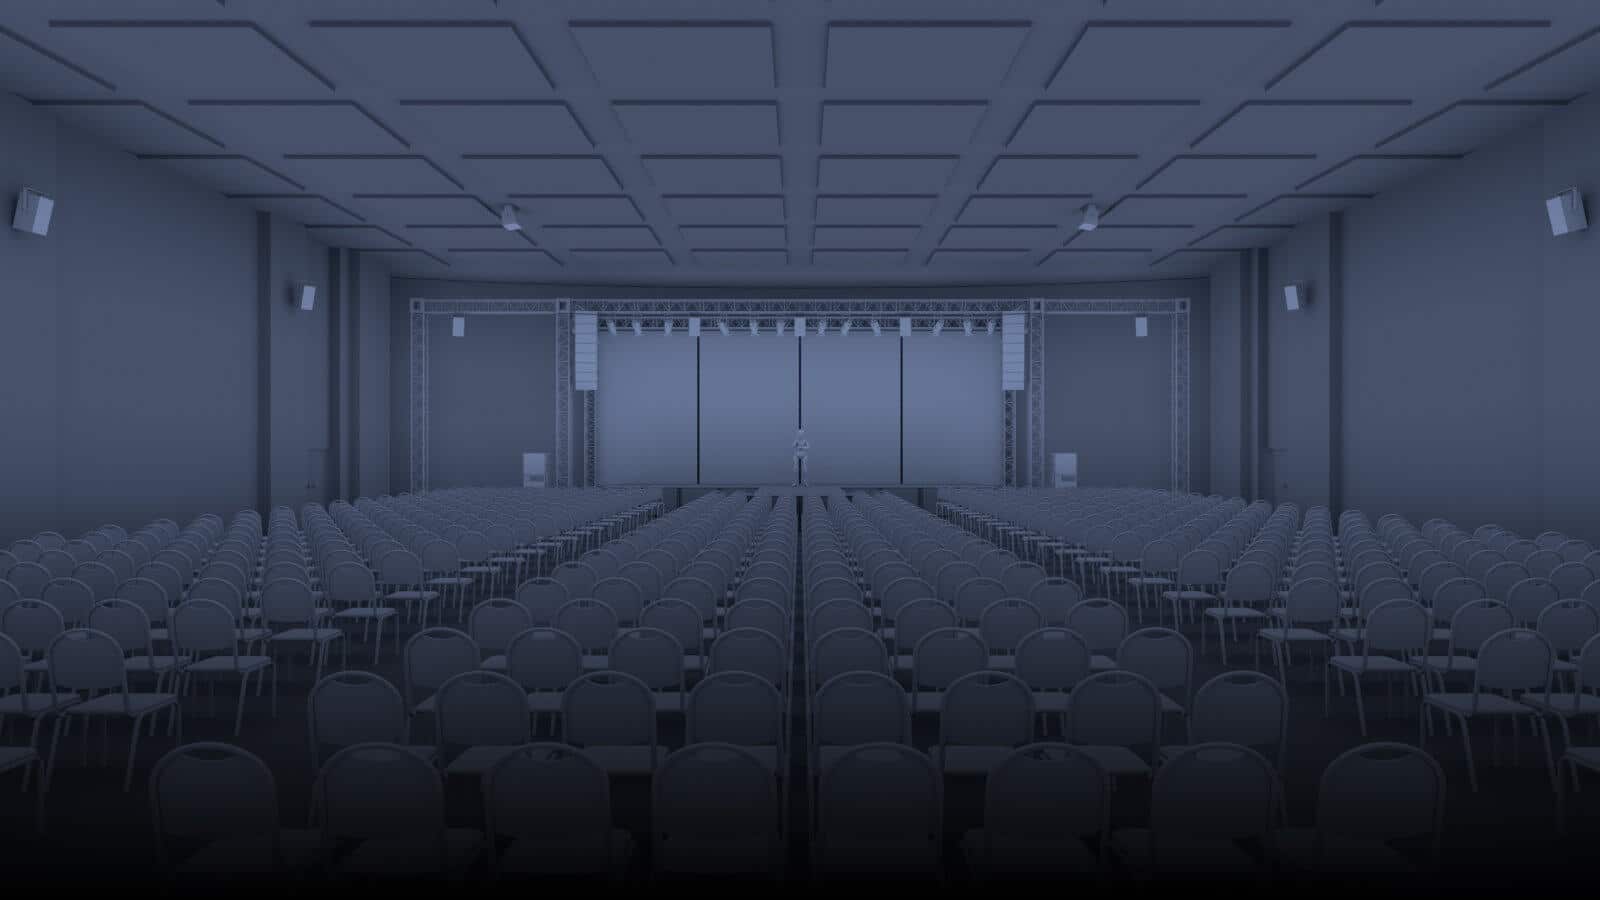 An auditorium with no speakers deployed